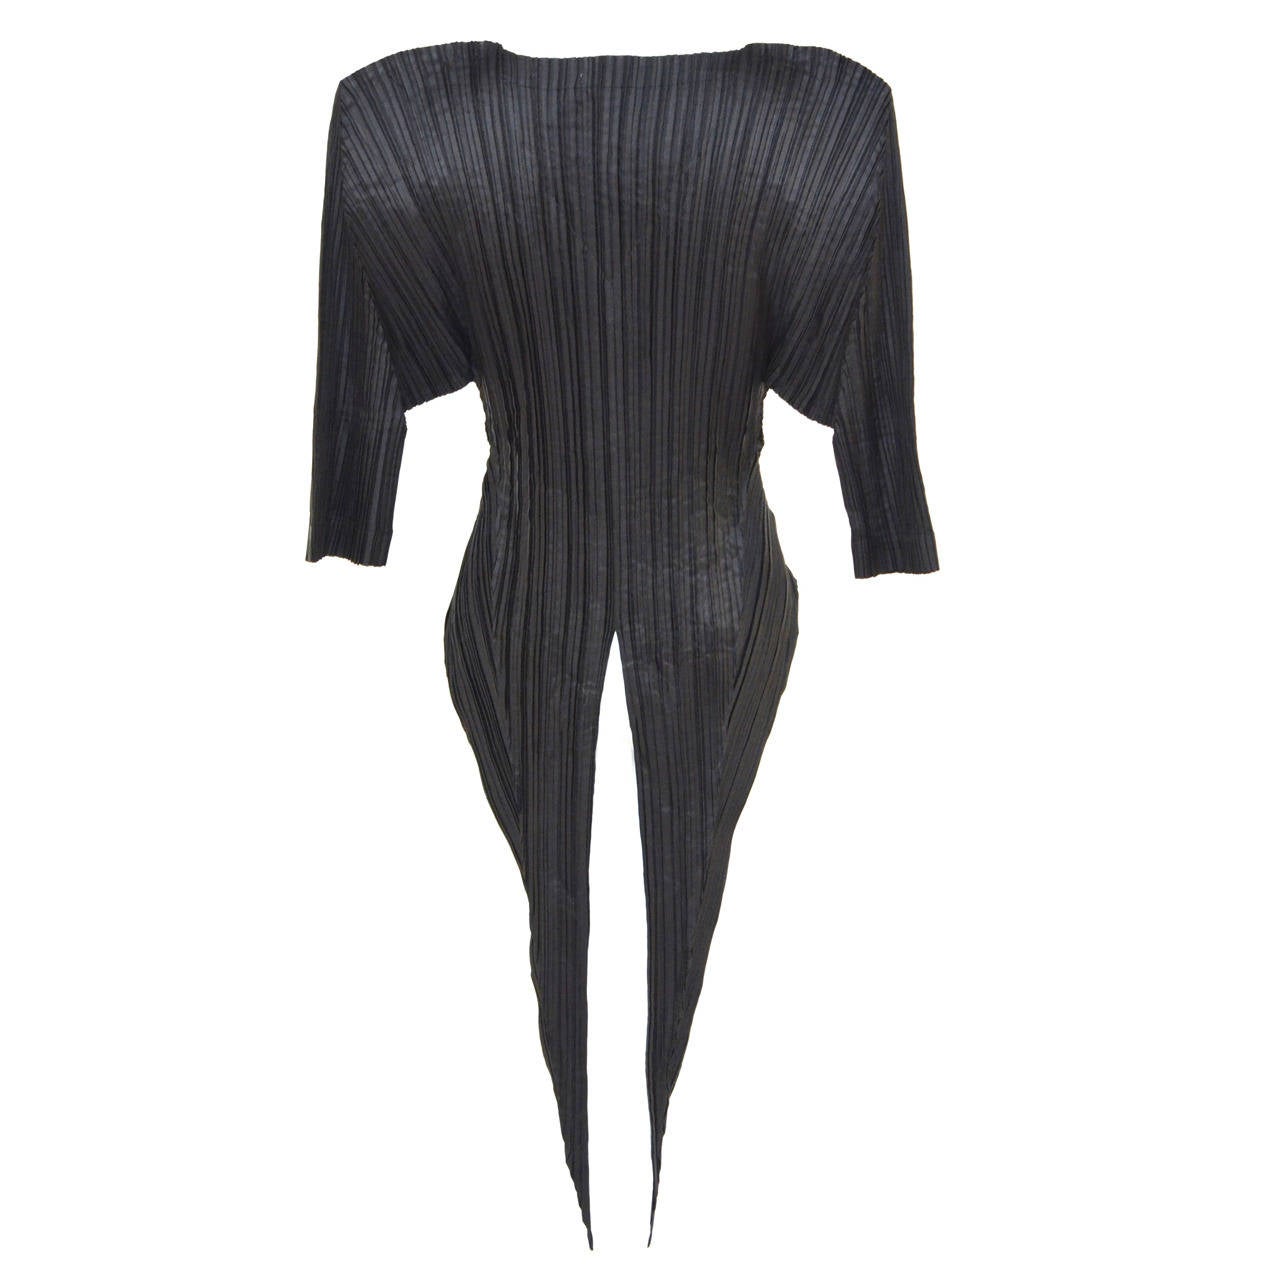 Issey Miyake Origami Pleat Top With Tails 1989 For Sale at 1stdibs